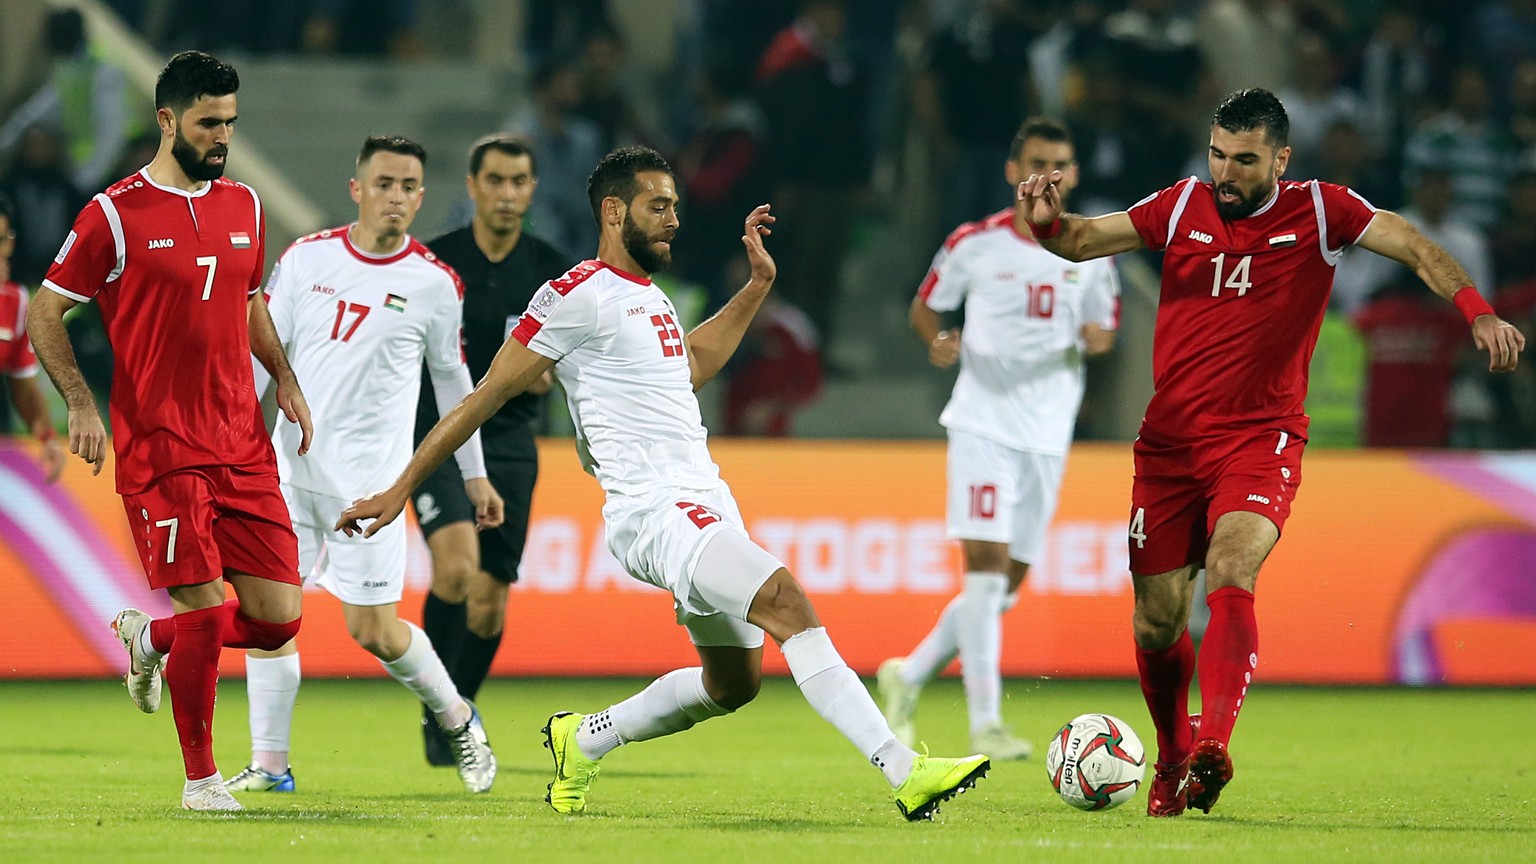 epa07265804 Tamer Hag Mohamad (R) of Syria in action against Mohammed Darwish (C) of Palestine during the 2019 AFC Asian Cup group B preliminary round match between Syria and Palestine in Sharjah, Uni ...